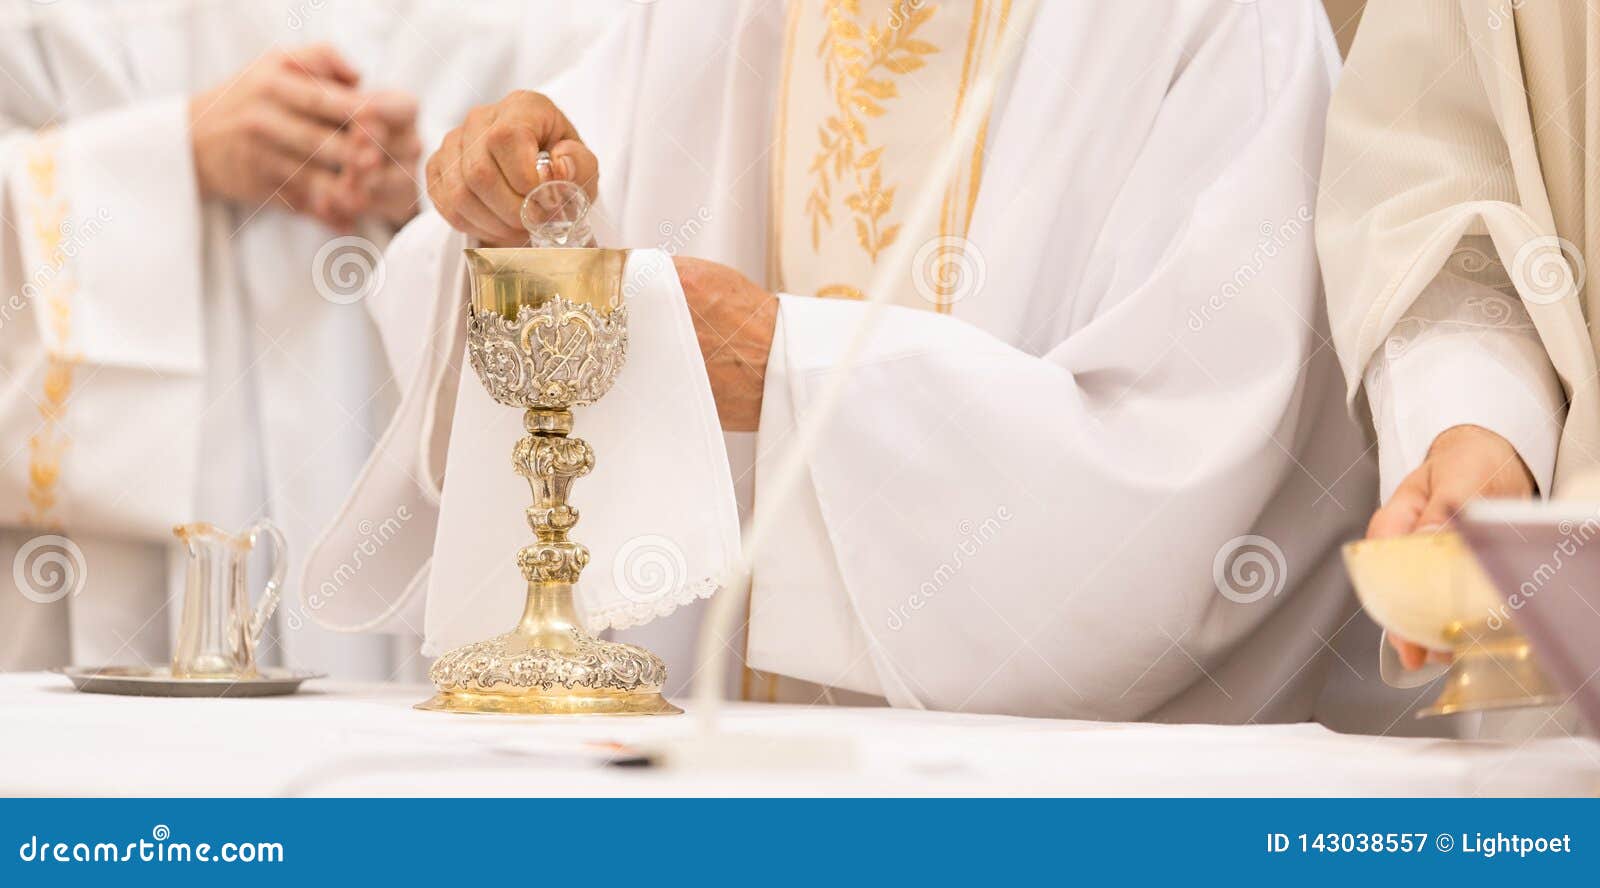 priest` hands during a wedding ceremony/nuptial mass